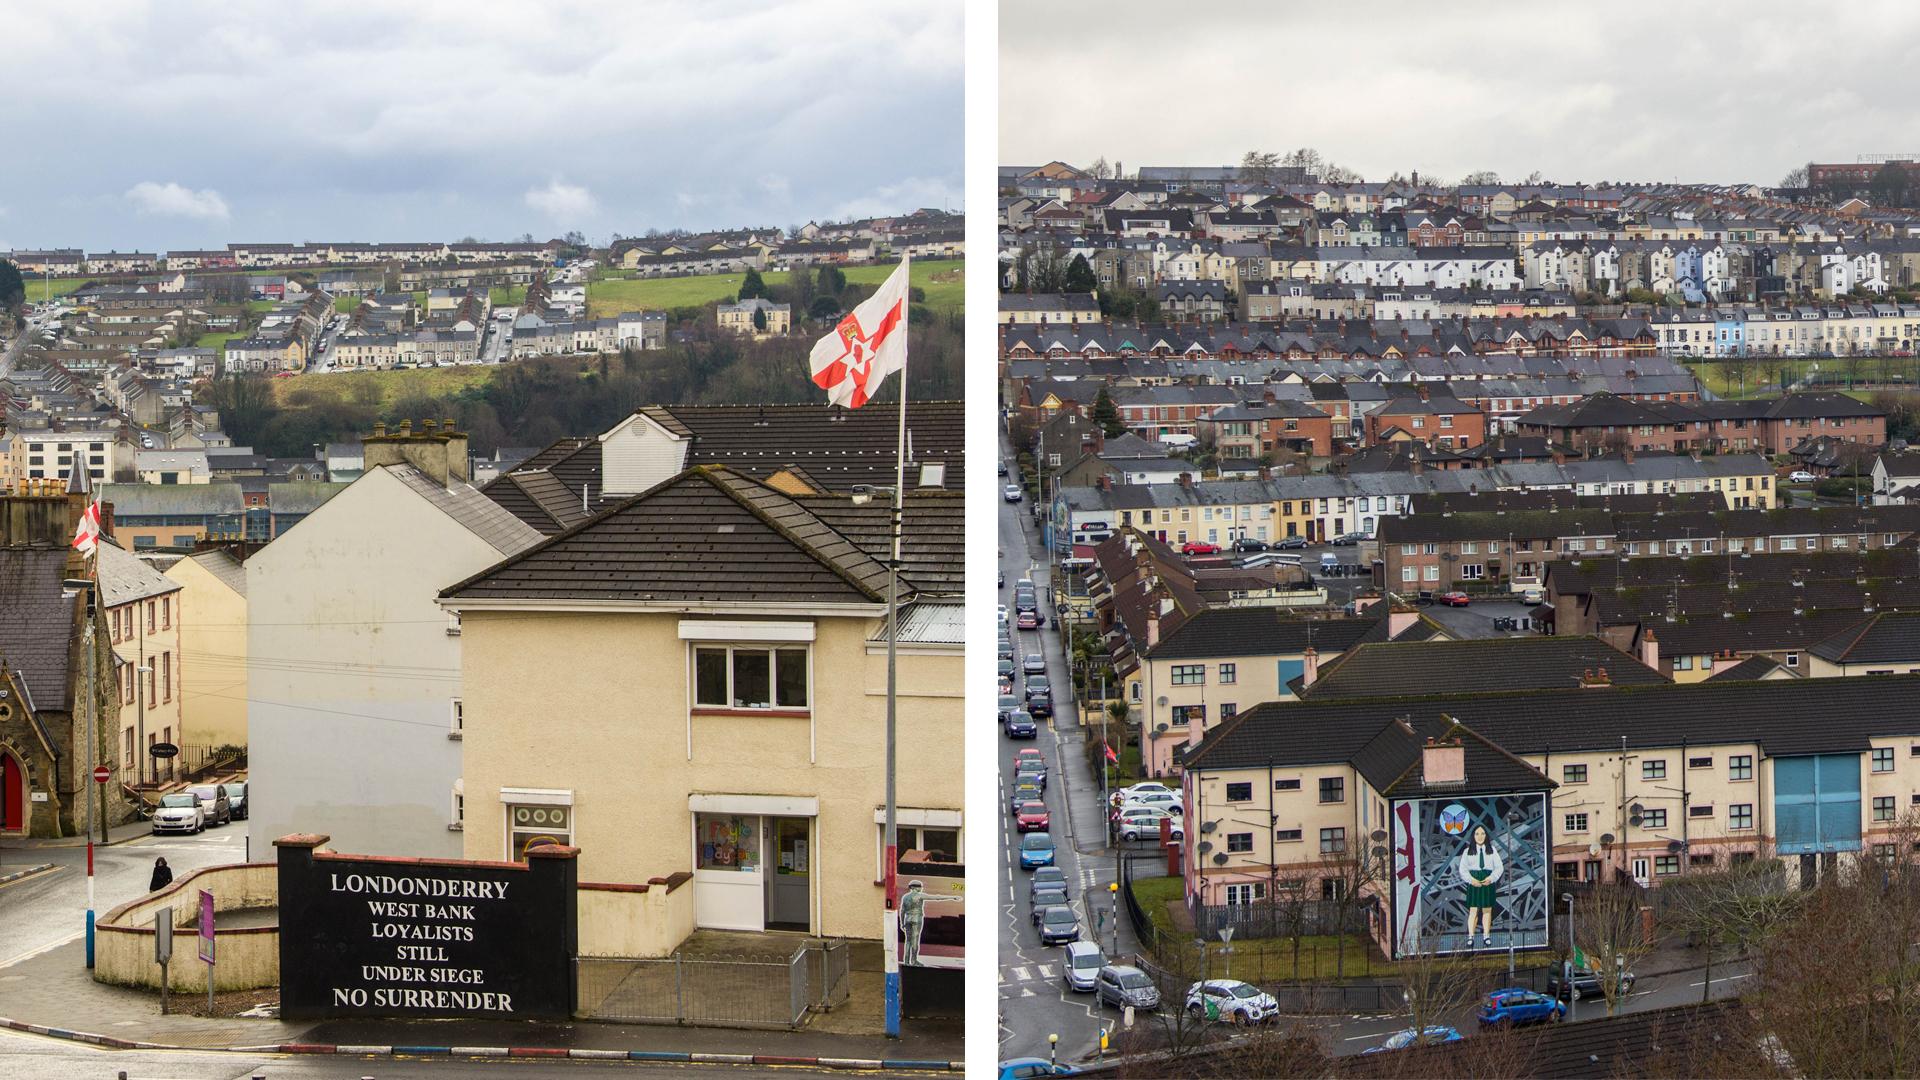 Derry/Londonderry is a lovely, thriving and prosperous city. But there are still some signs of its sectarian history evident today.